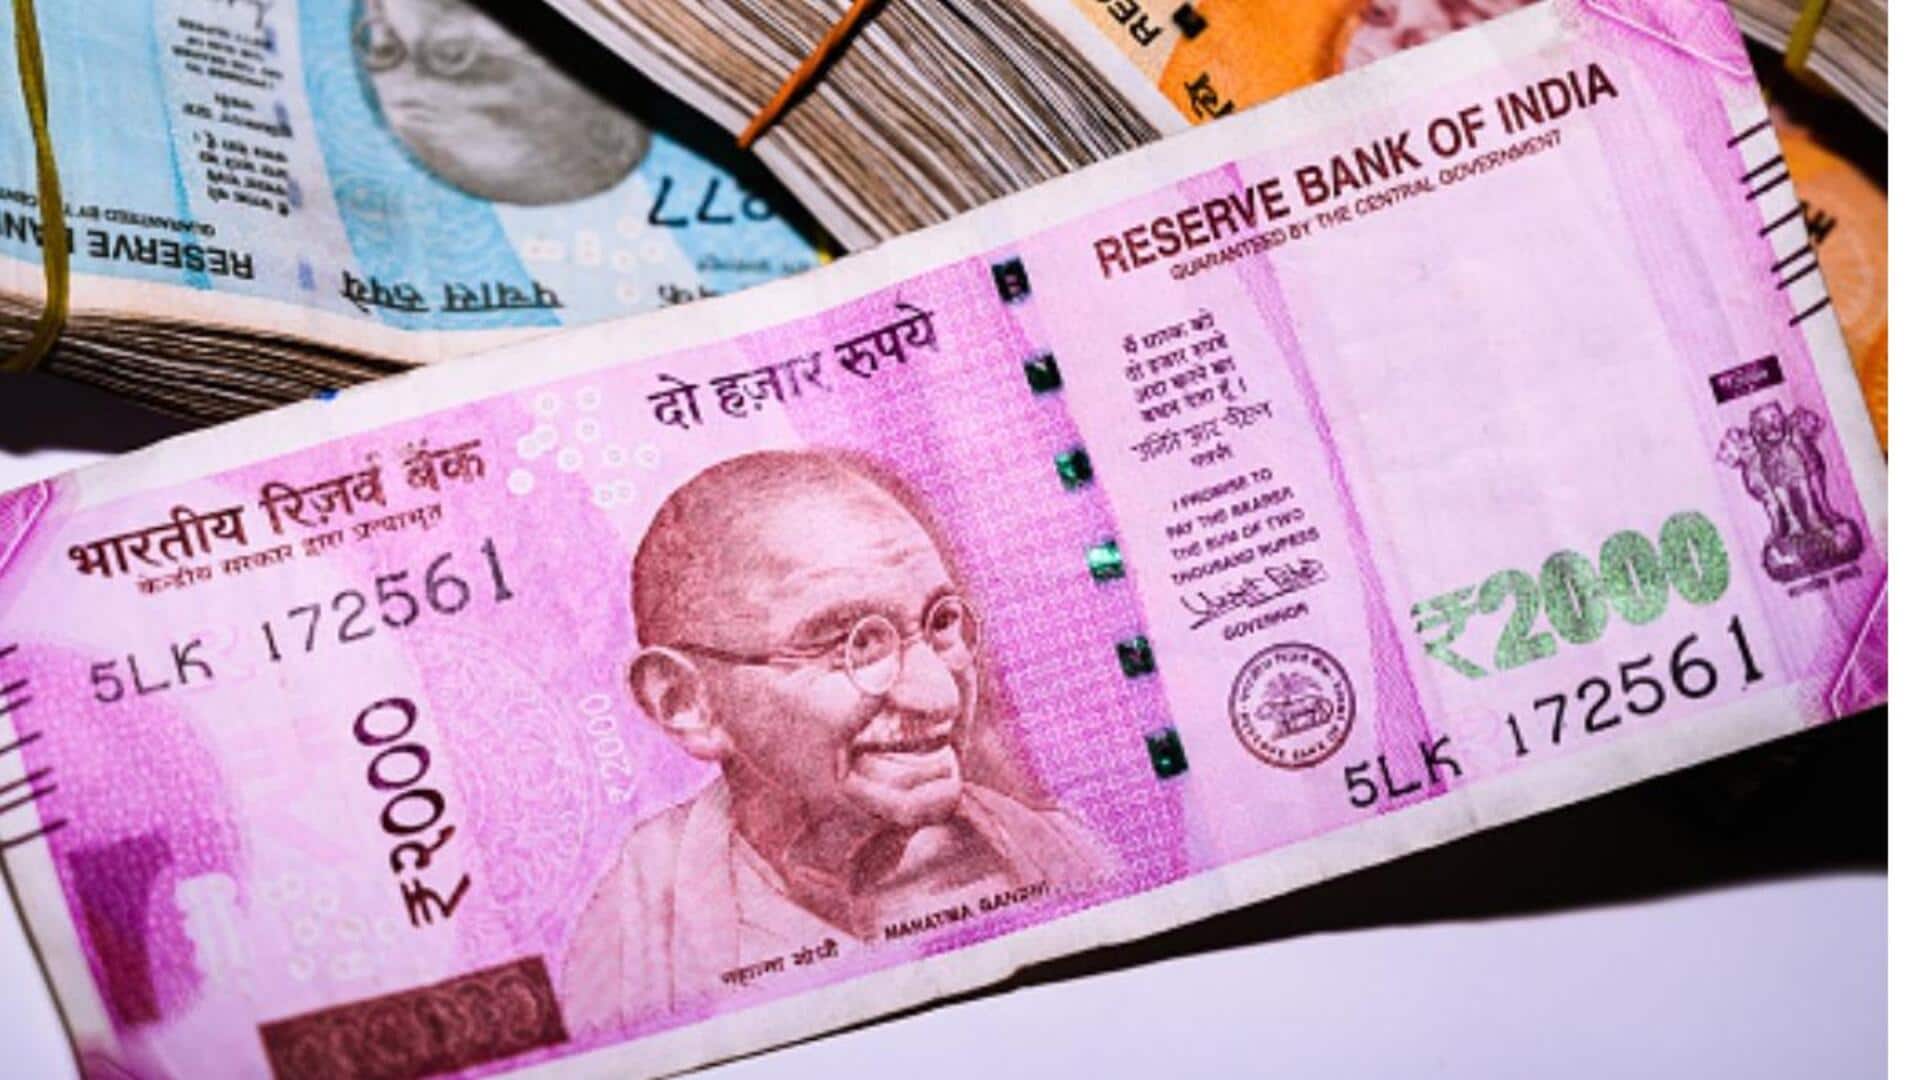 Over 97% of Rs. 2,000 notes returned, says RBI